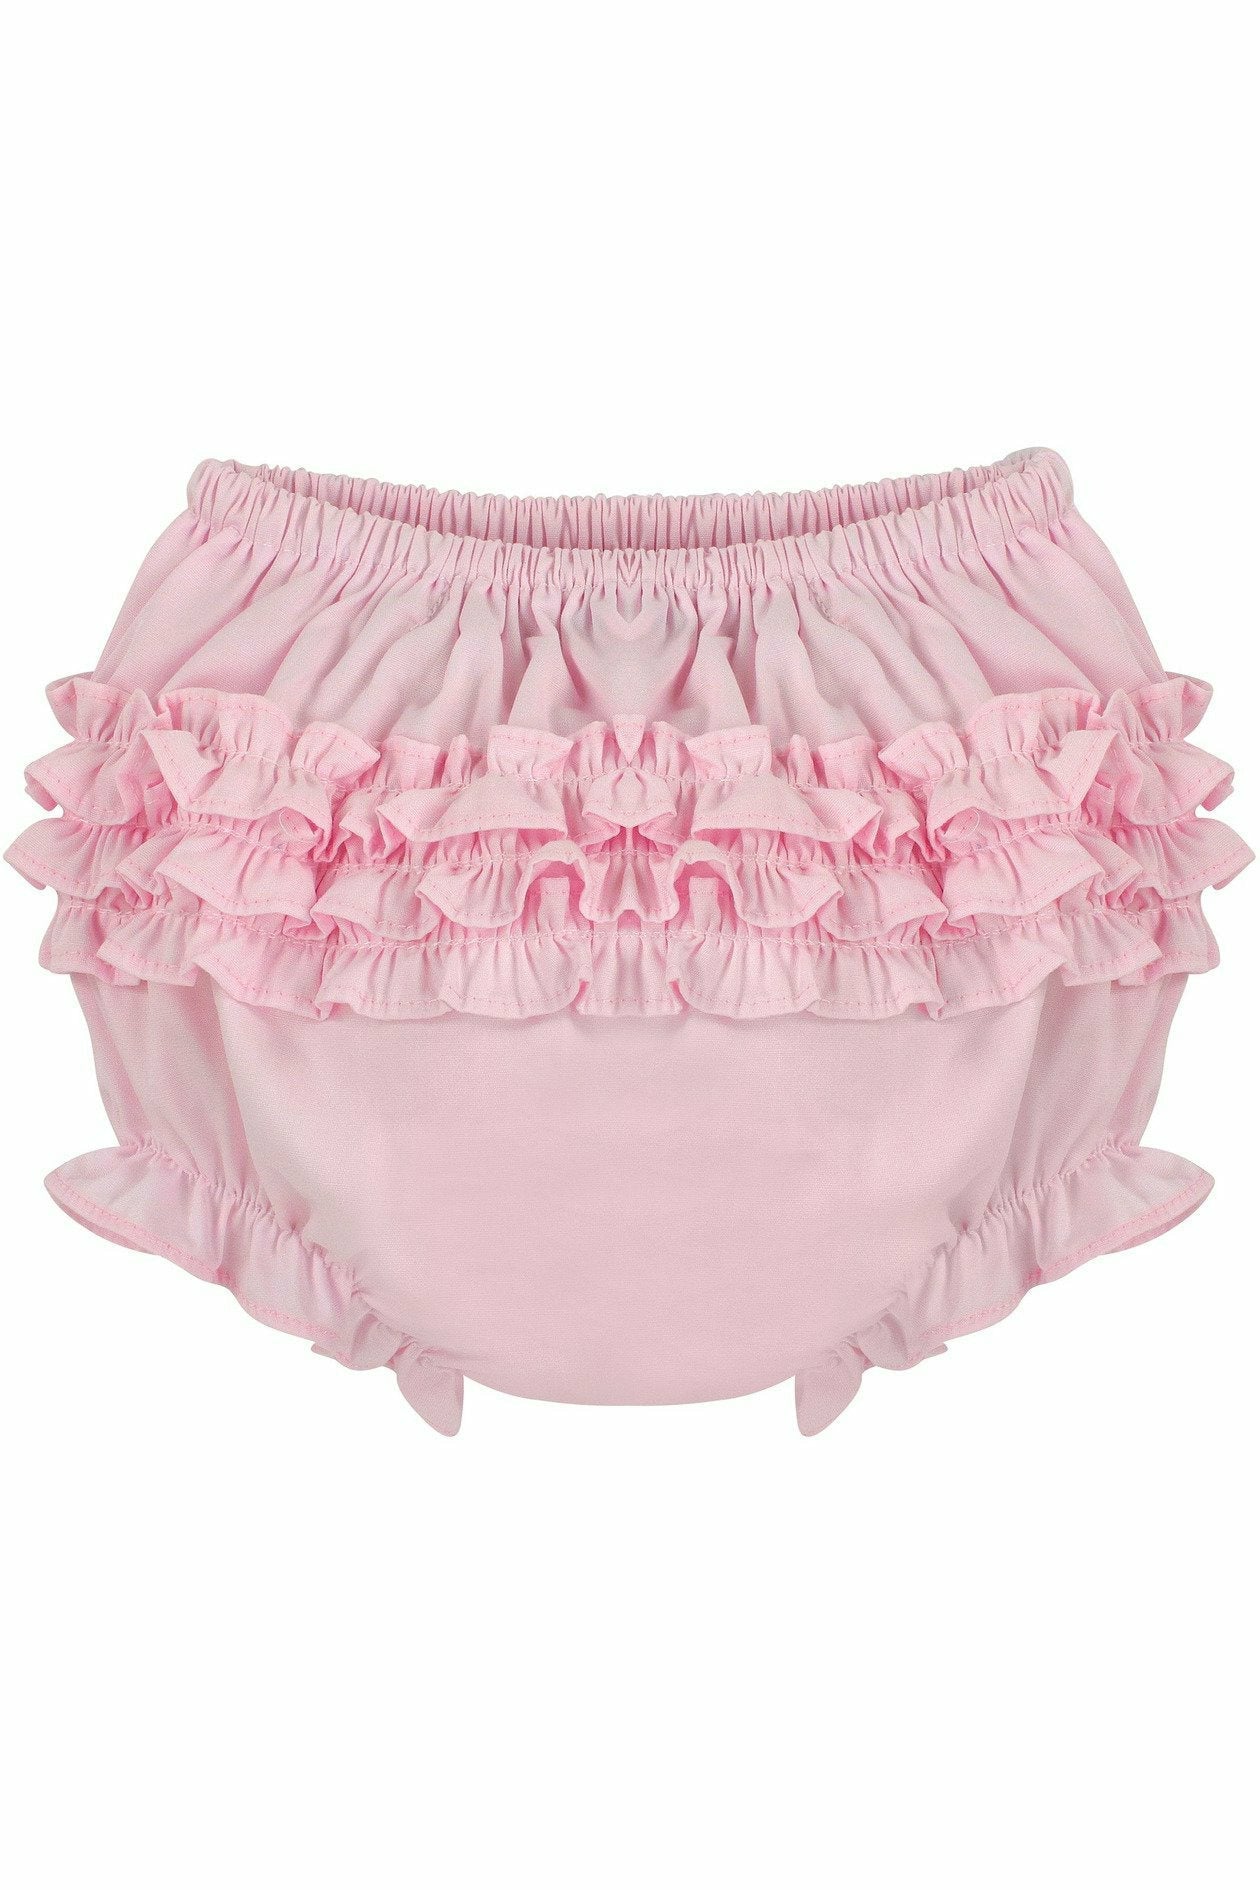 Baby Girls Ruffle Diaper Covers - Pink Bloomers